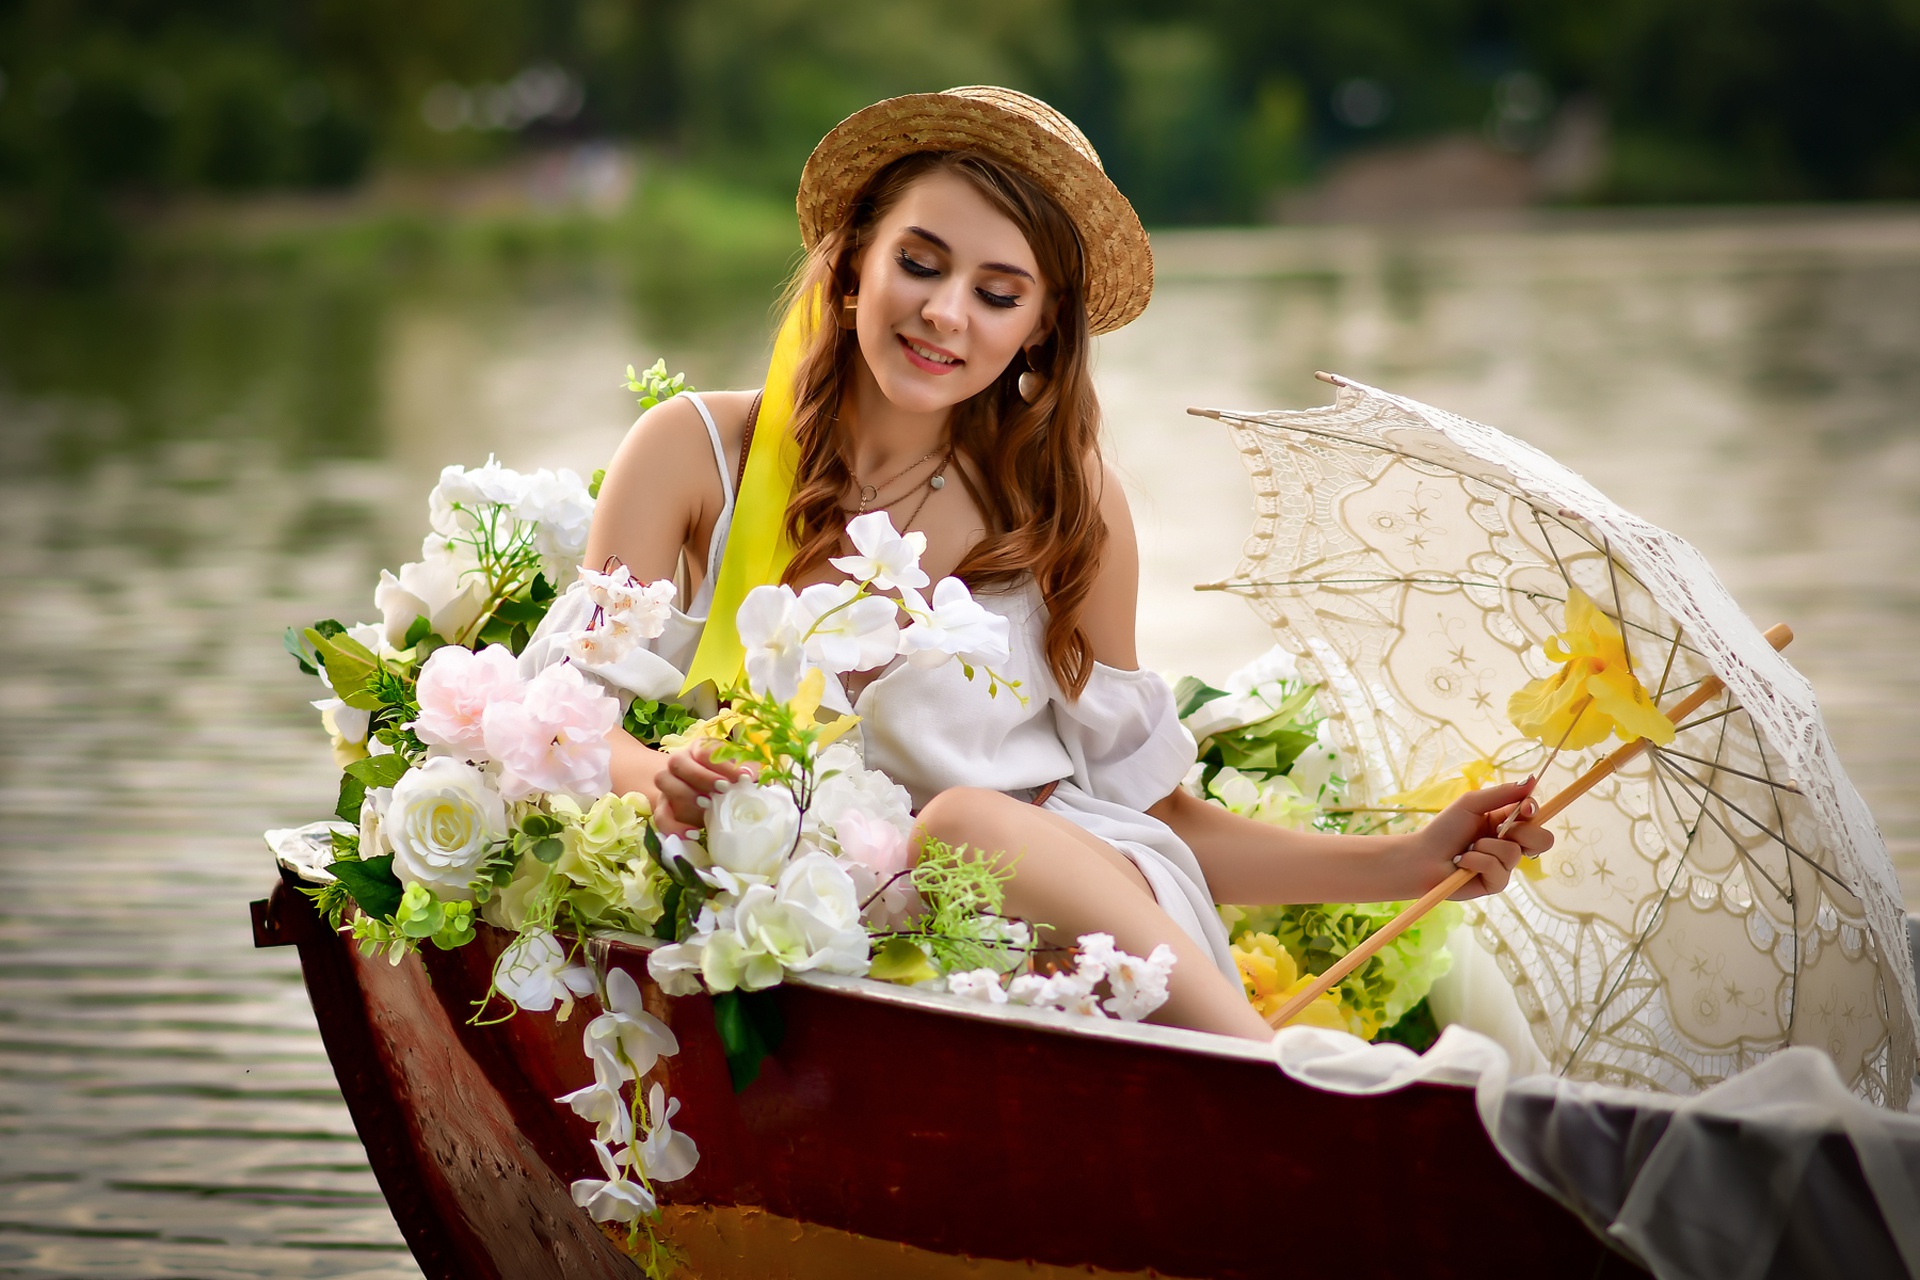 People 1920x1280 women flowers boat vehicle hat makeup umbrella women outdoors women with hats women with umbrella brunette long hair smiling vibrant